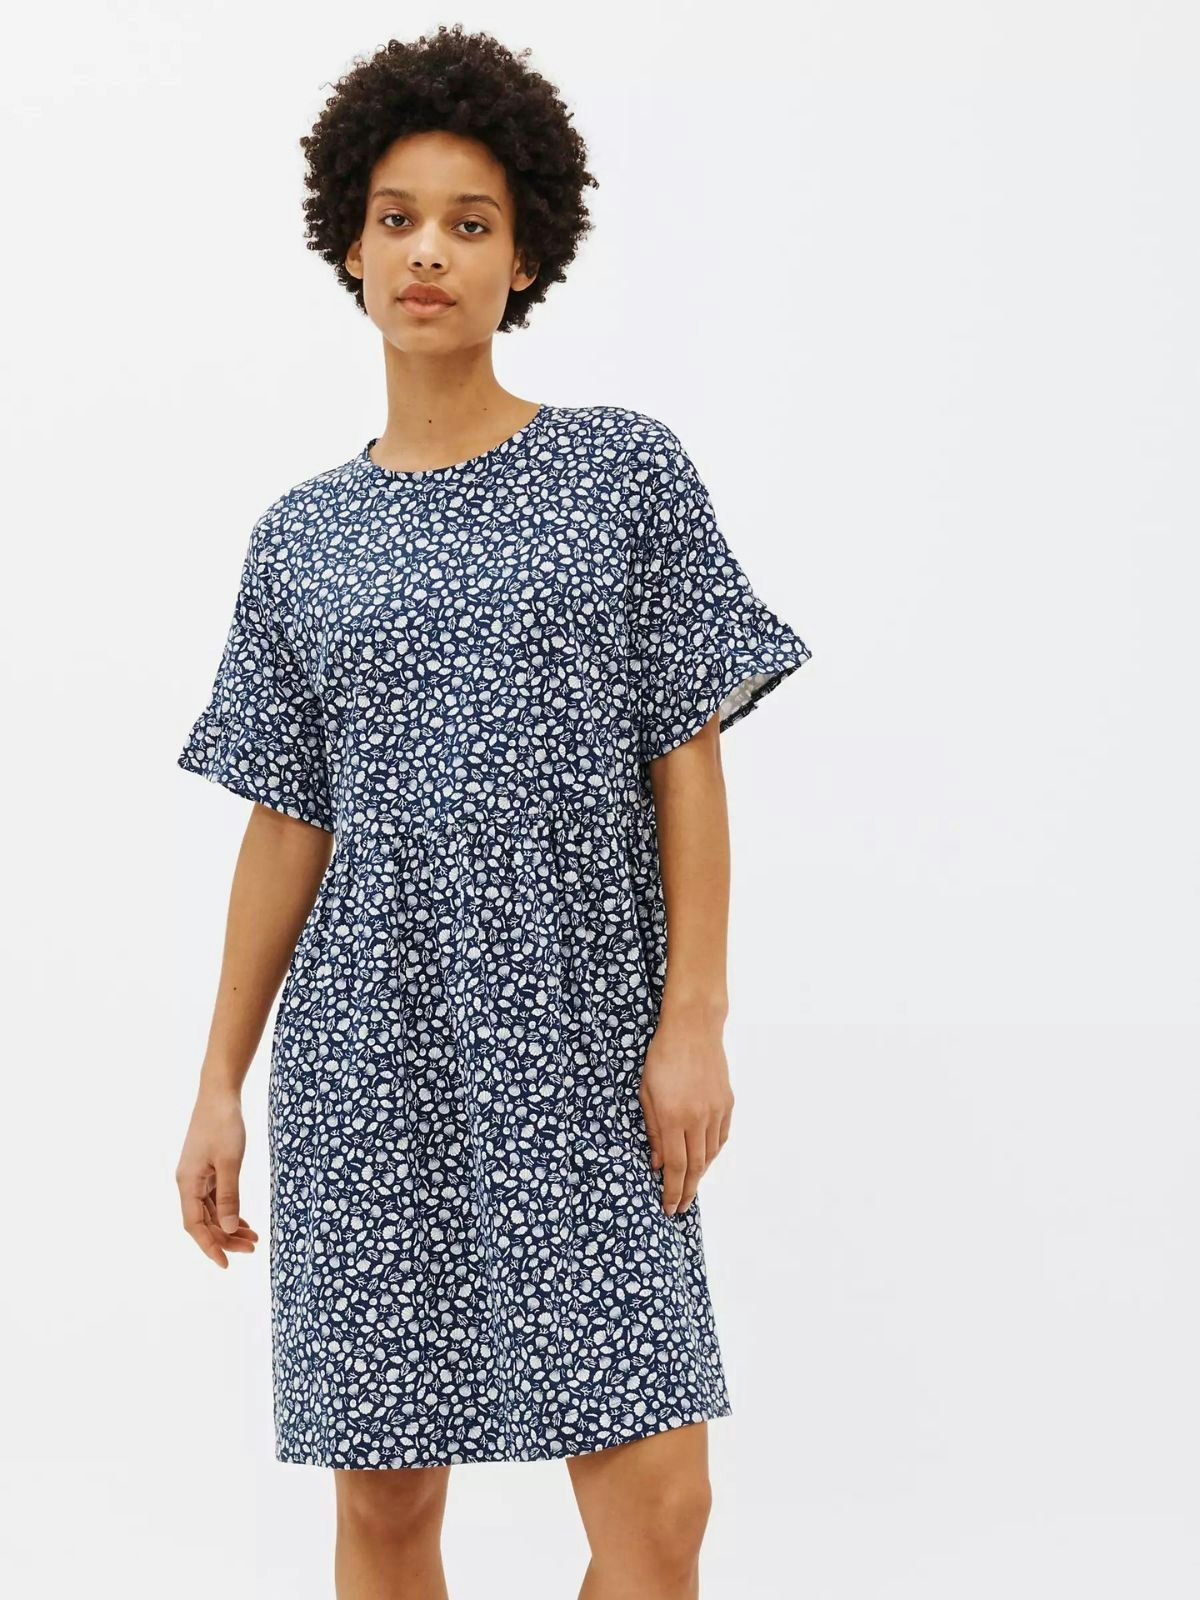 11 Best Cotton Summer Dresses For Over 50s | Life | Yours